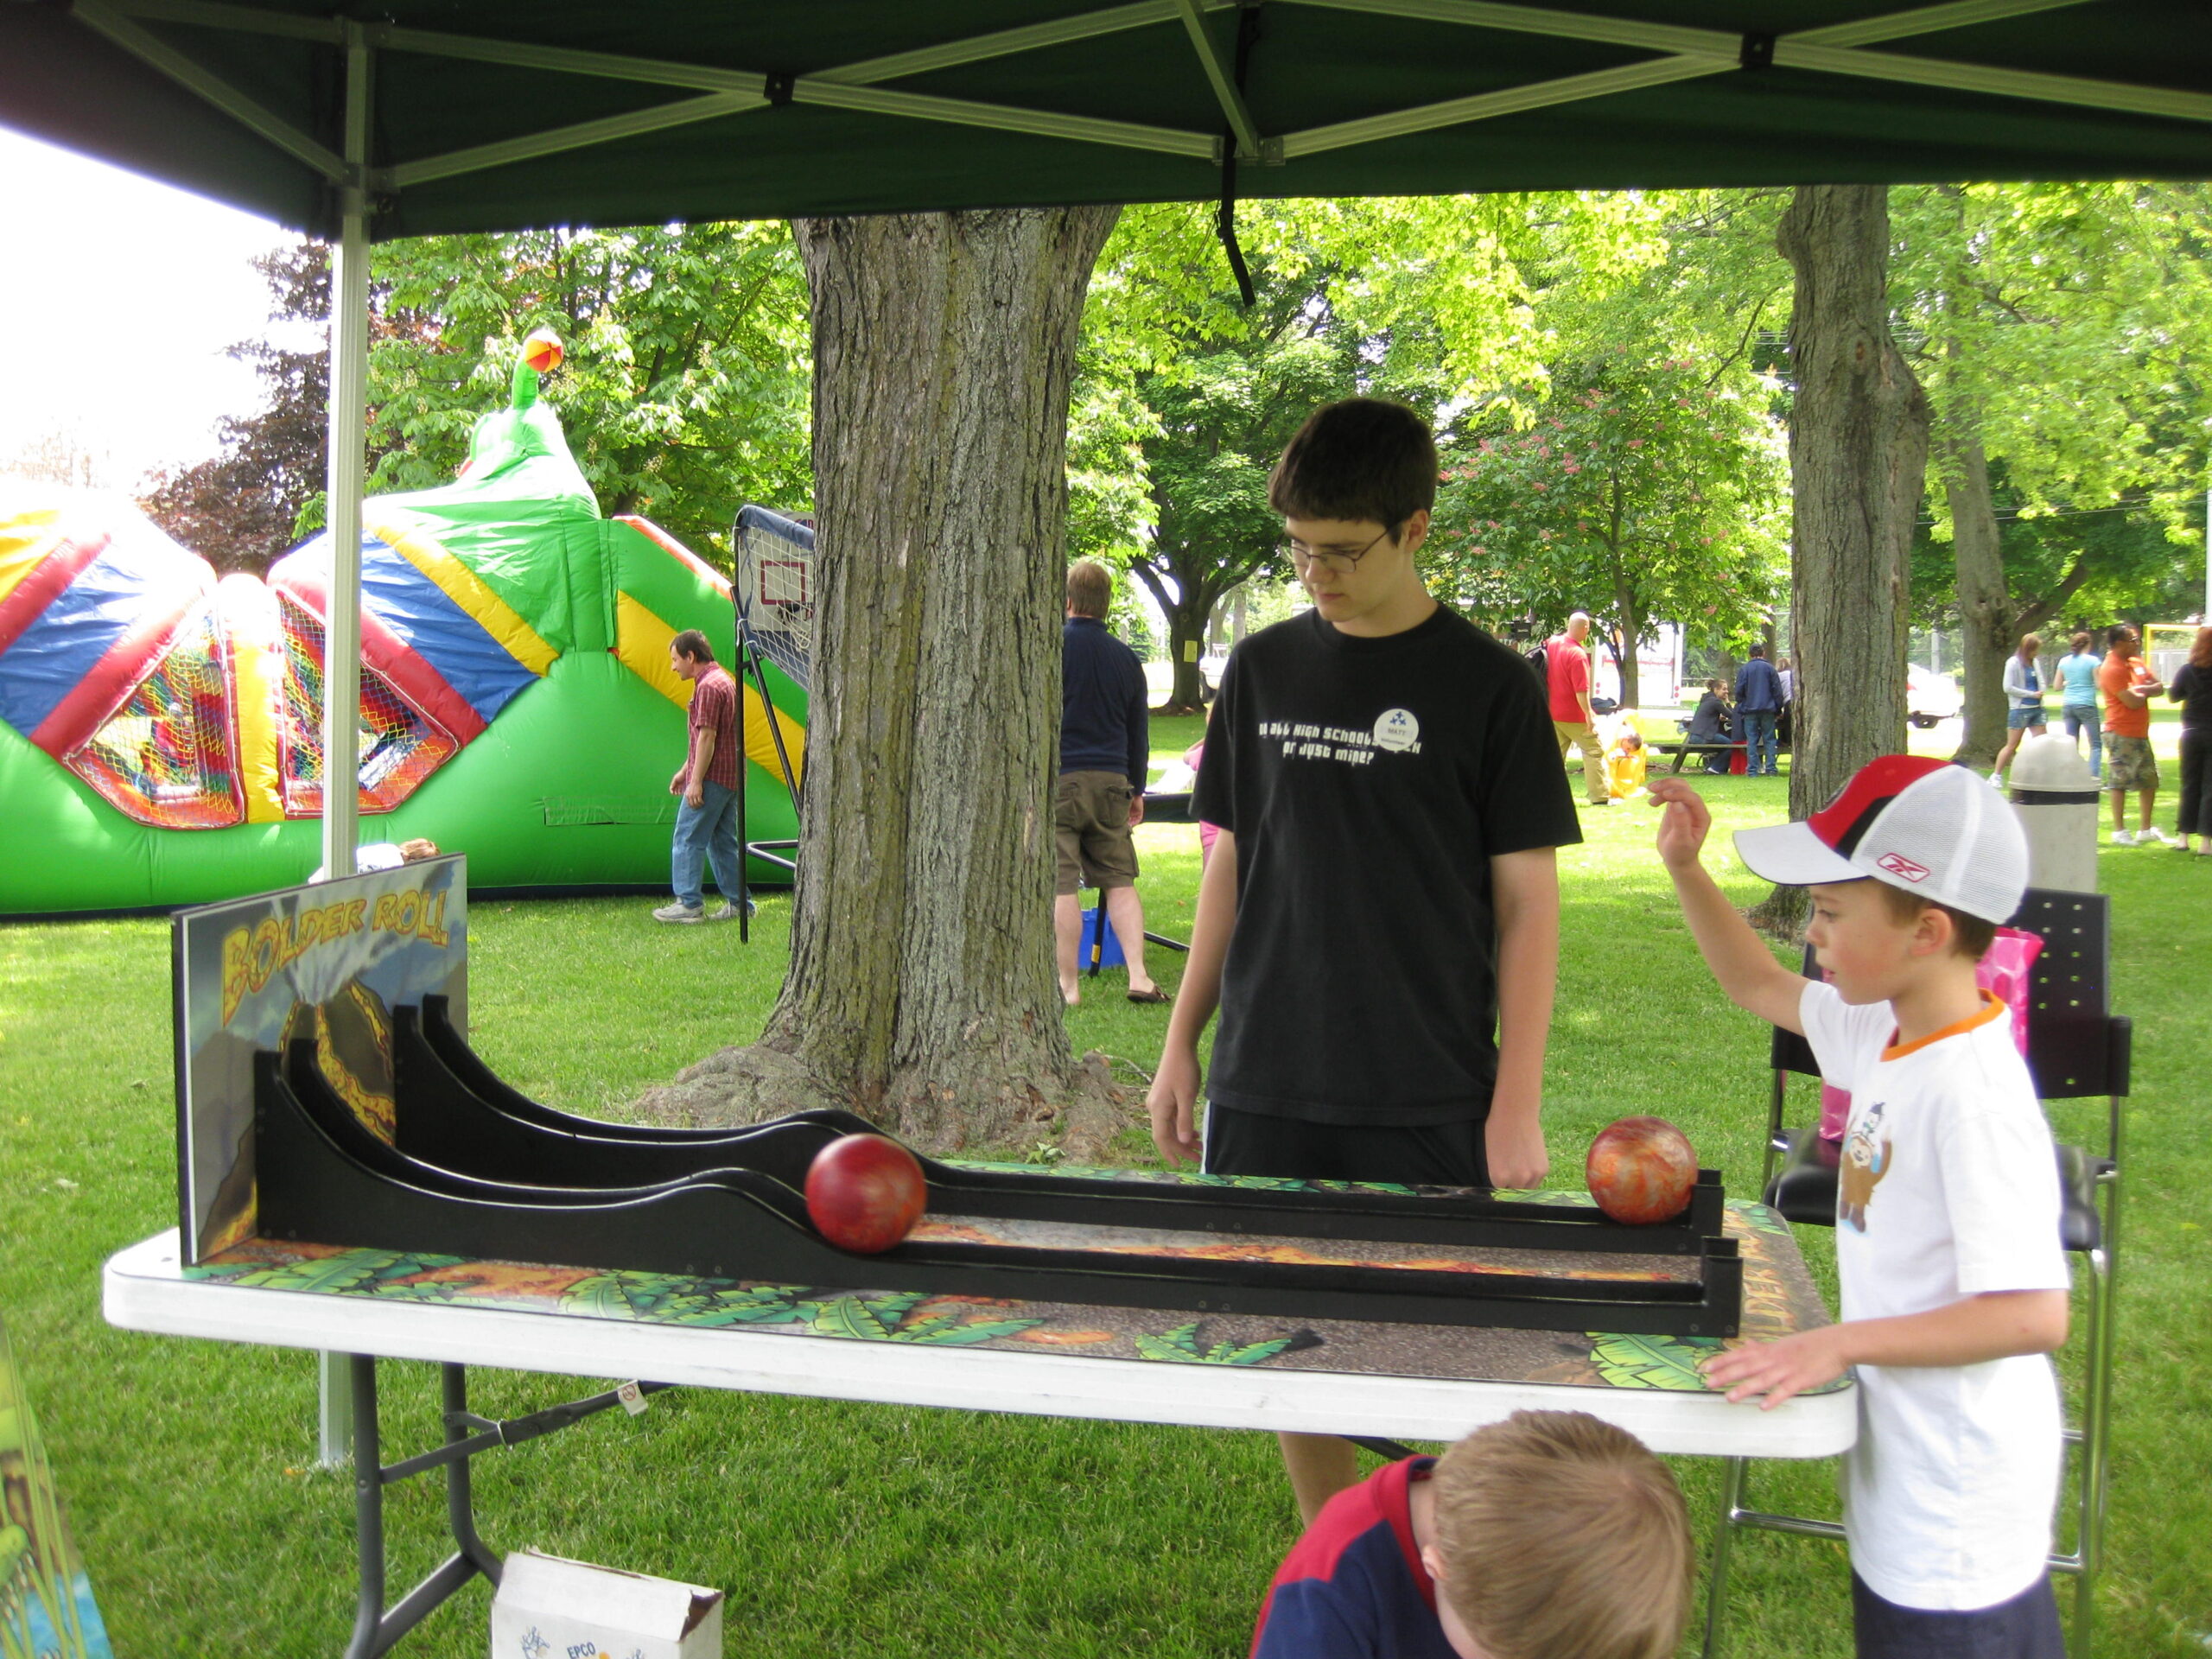 Child playing the boller roller arcade game at outdoor event